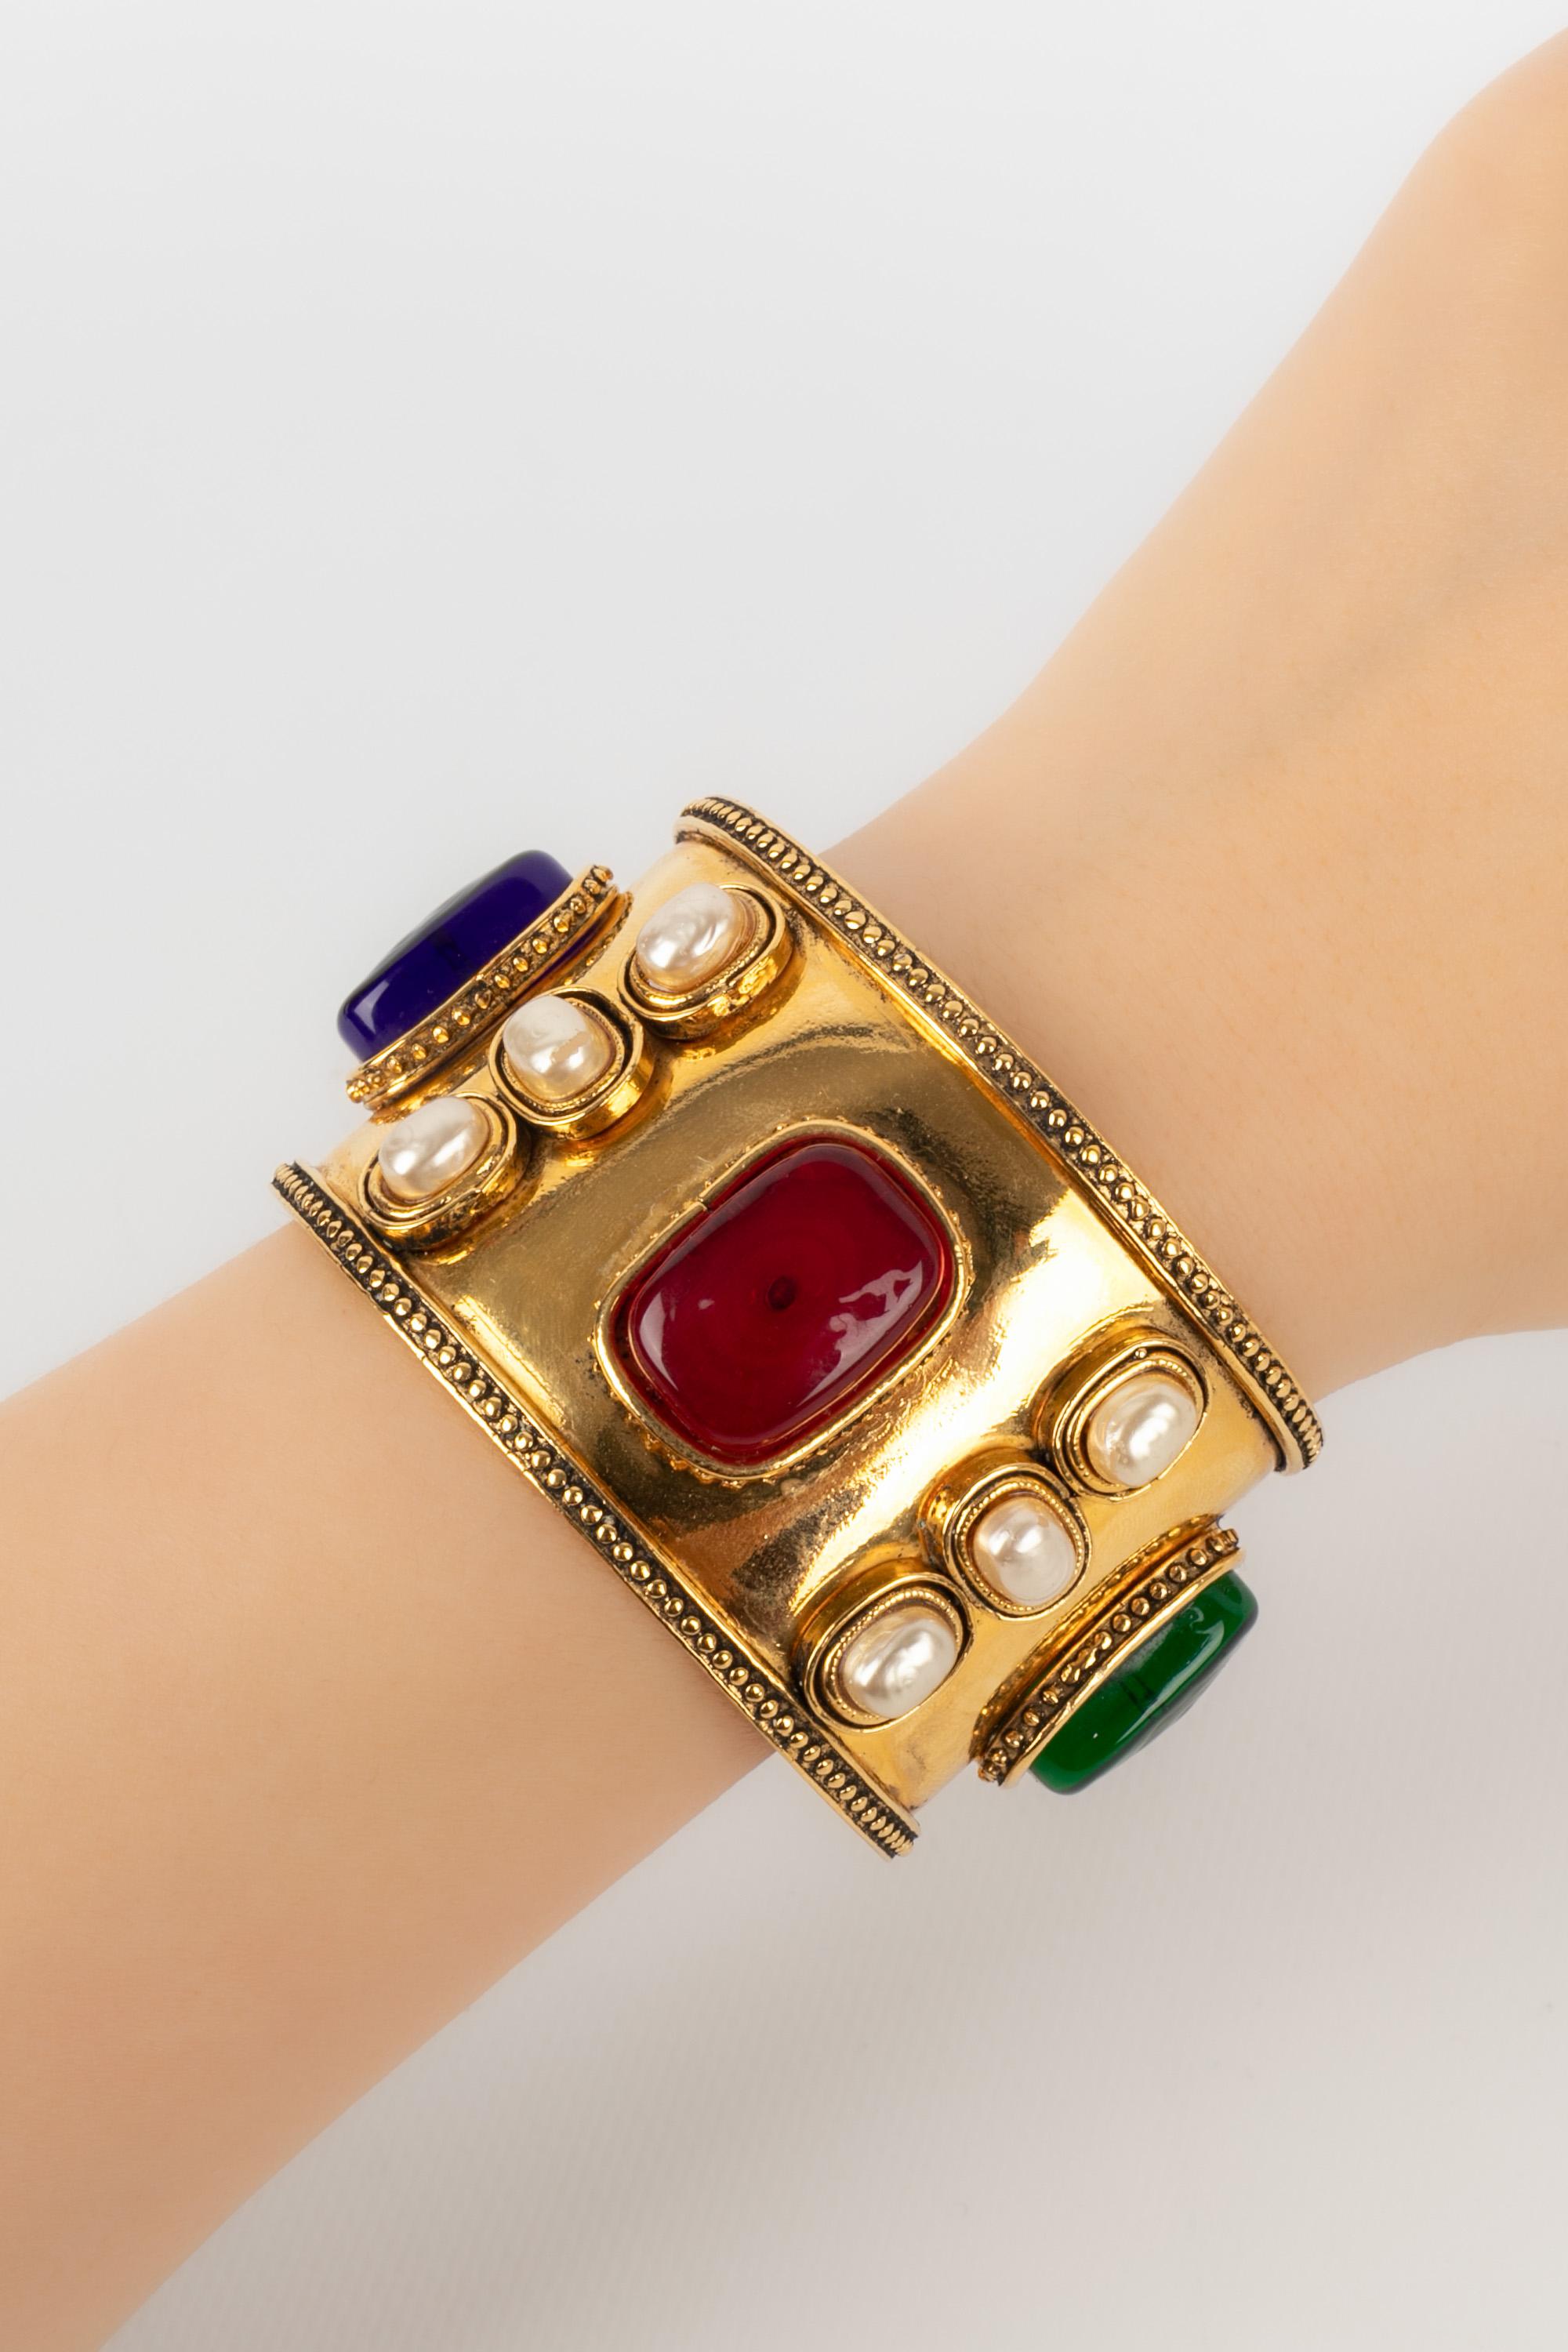 CHANEL - (Made in France) Golden metal cuff bracelet with glass paste and pearly cabochons. 2cc3 Collection from the end of the 1980s.

Condition:
Very good condition

Dimensions:
Wrist circumference: 15.5 cm - Opening: 2 cm

BRAB97